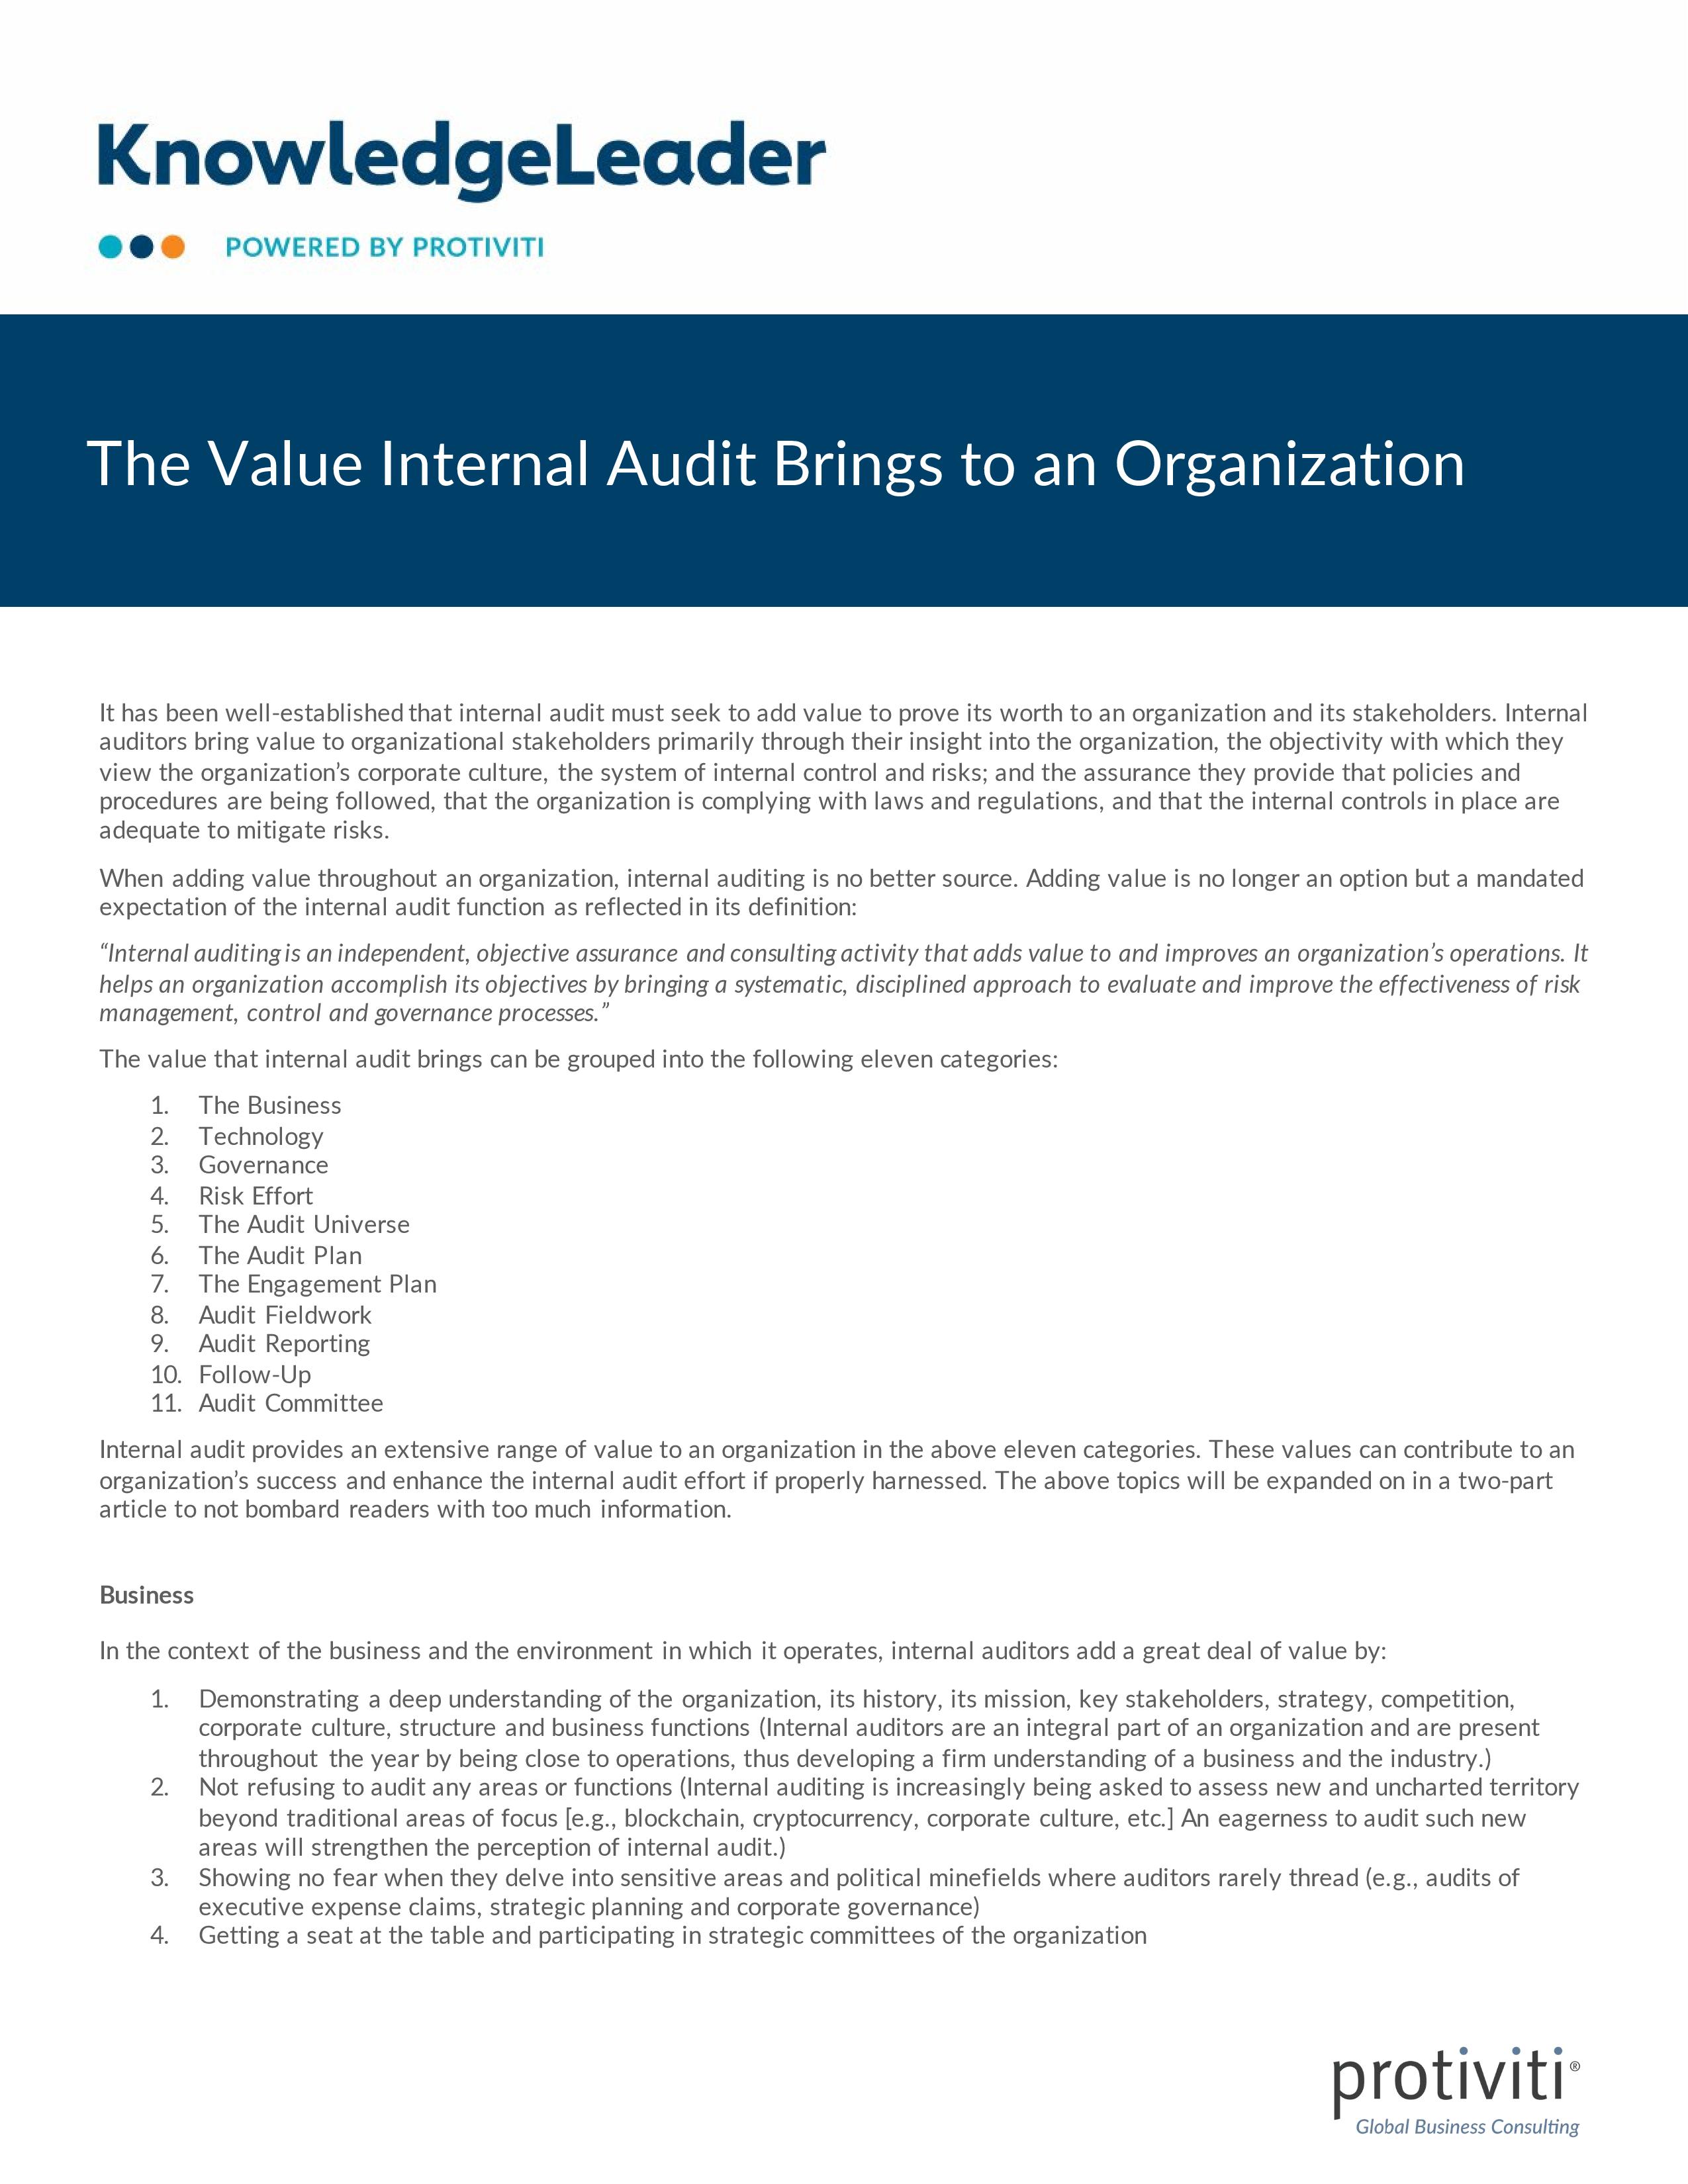 screenshot of the first page of The Value Internal Audit Brings to an Organization